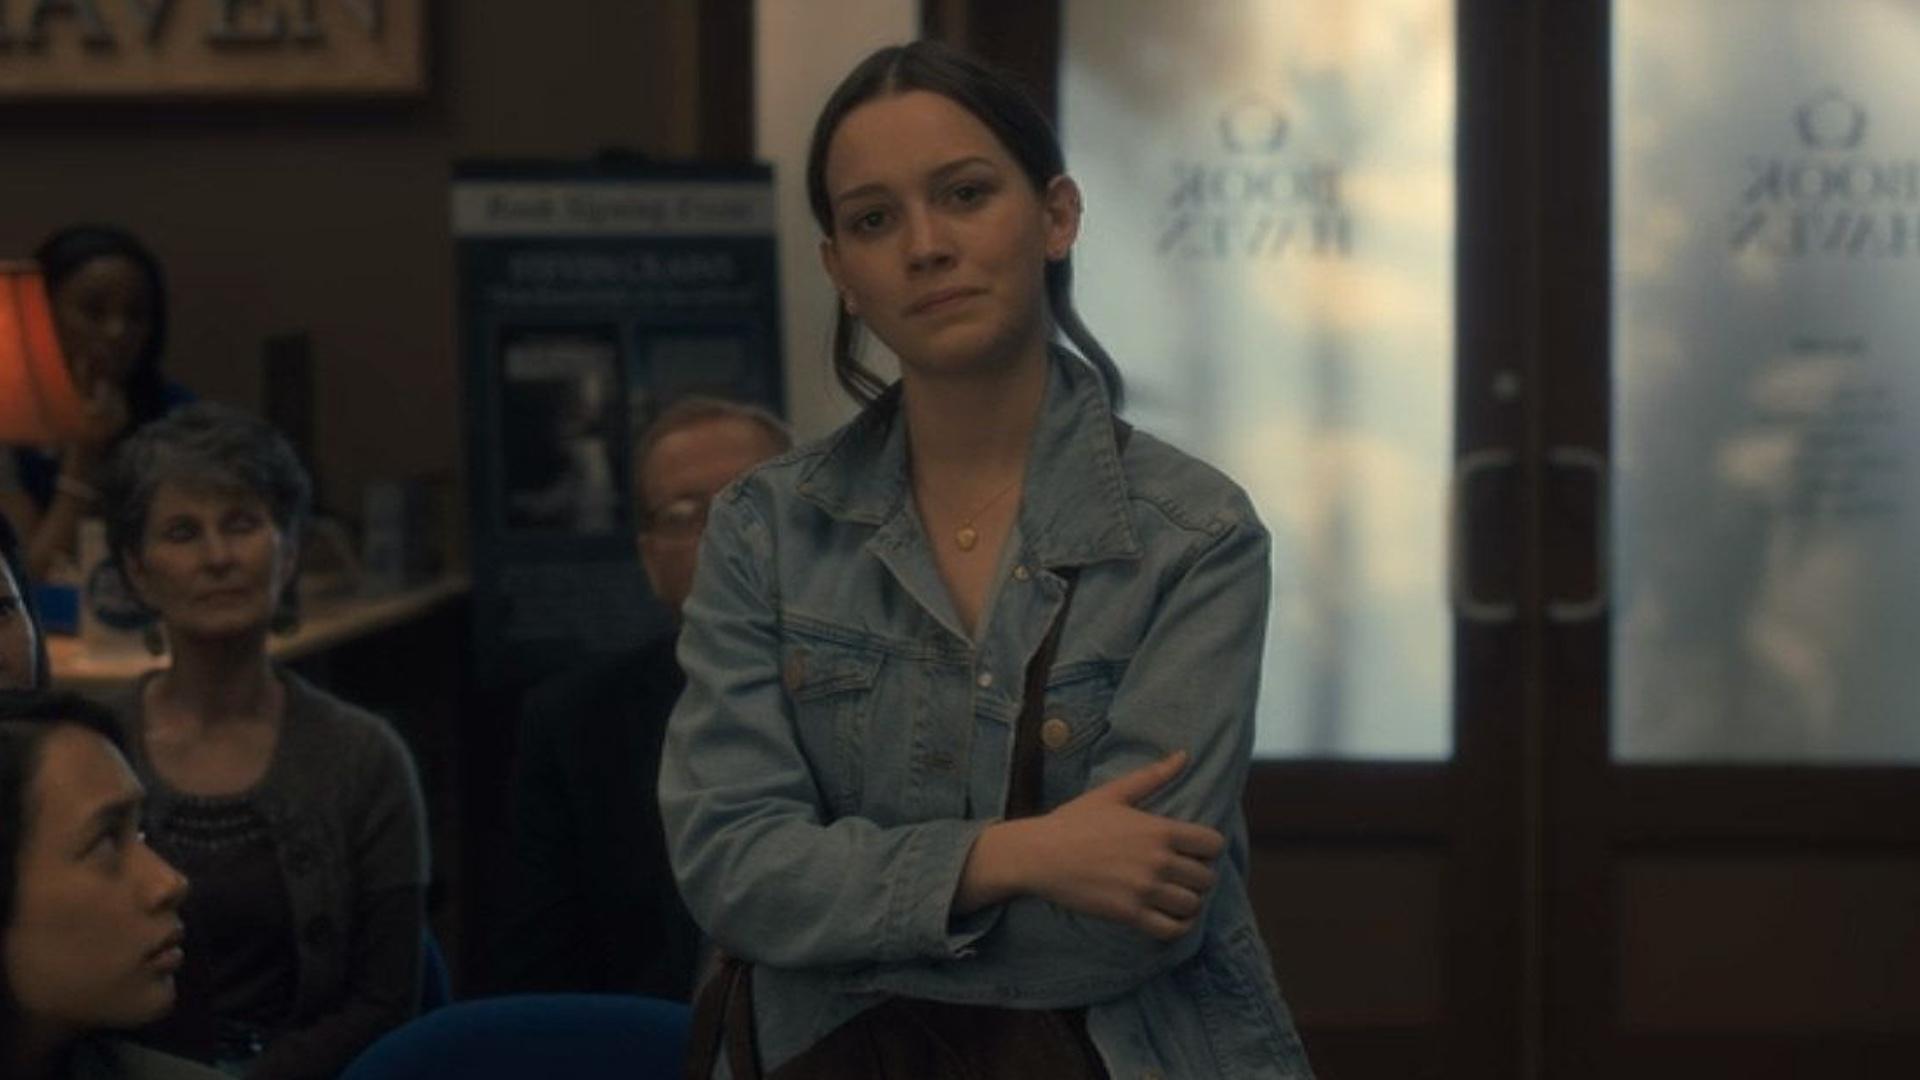 THE HAUNTING OF HILL HOUSE Star Victoria Pedretti Joins